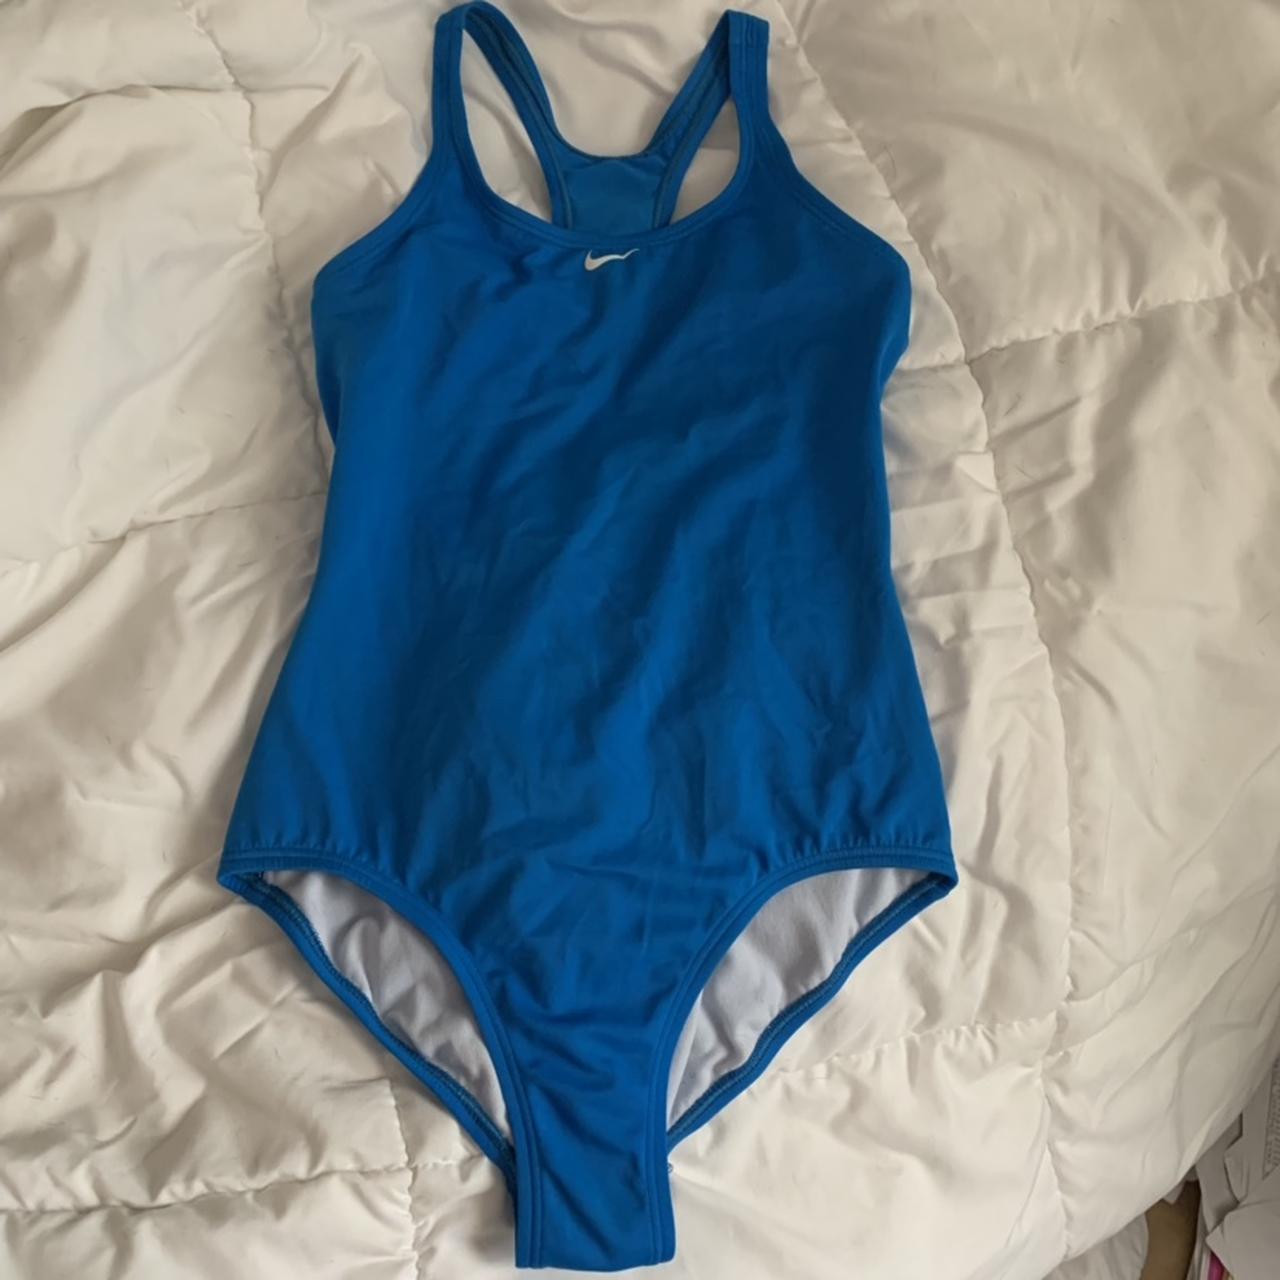 Blue nike one piece swim suit!!! I used to wear this... - Depop